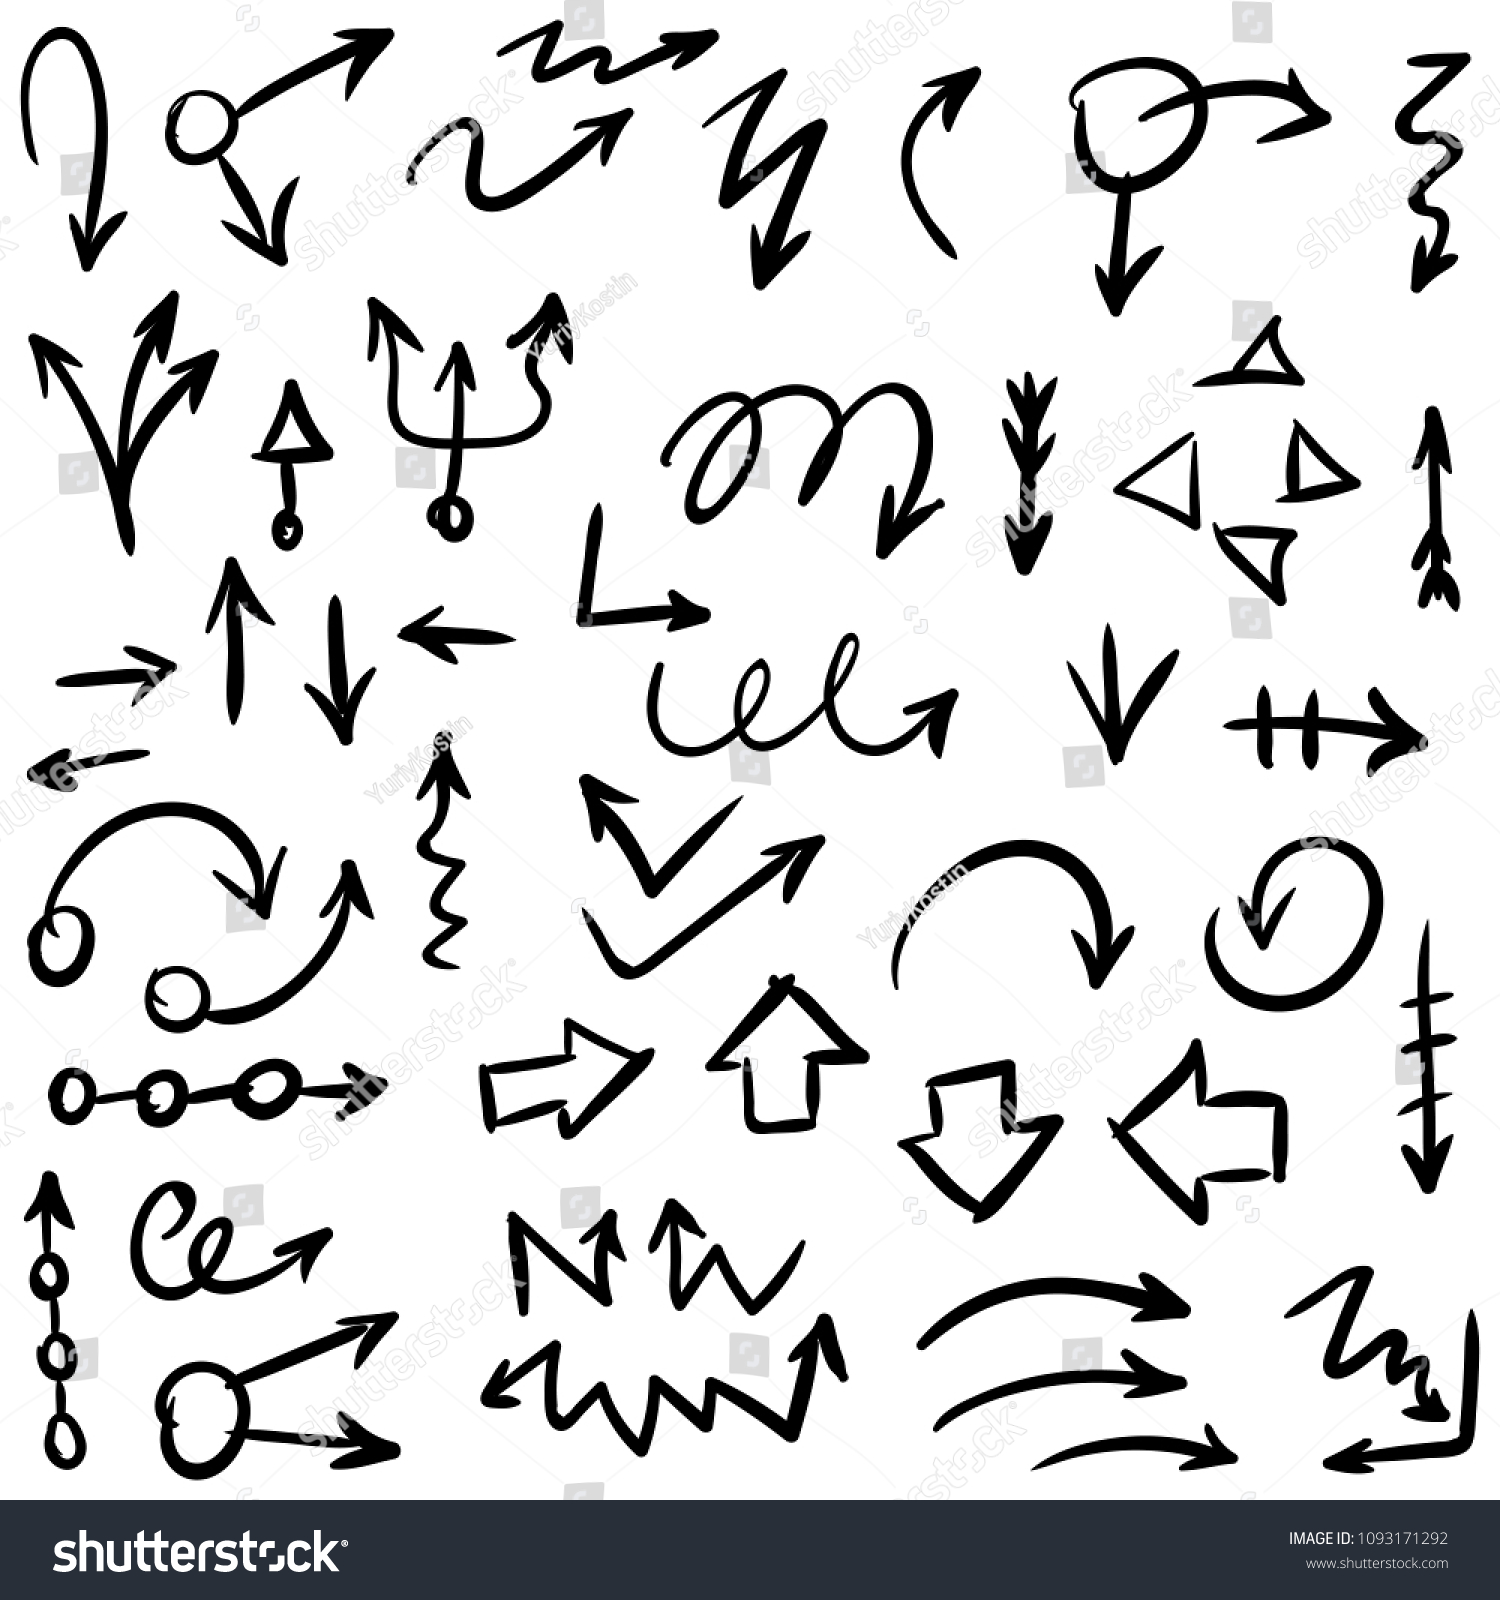 Arrow doodles vector. A set of simple sketches of arrows. Up, down, left, right ones. The effect of a pencil sketch isolated on white background. Vector eps 10. #1093171292